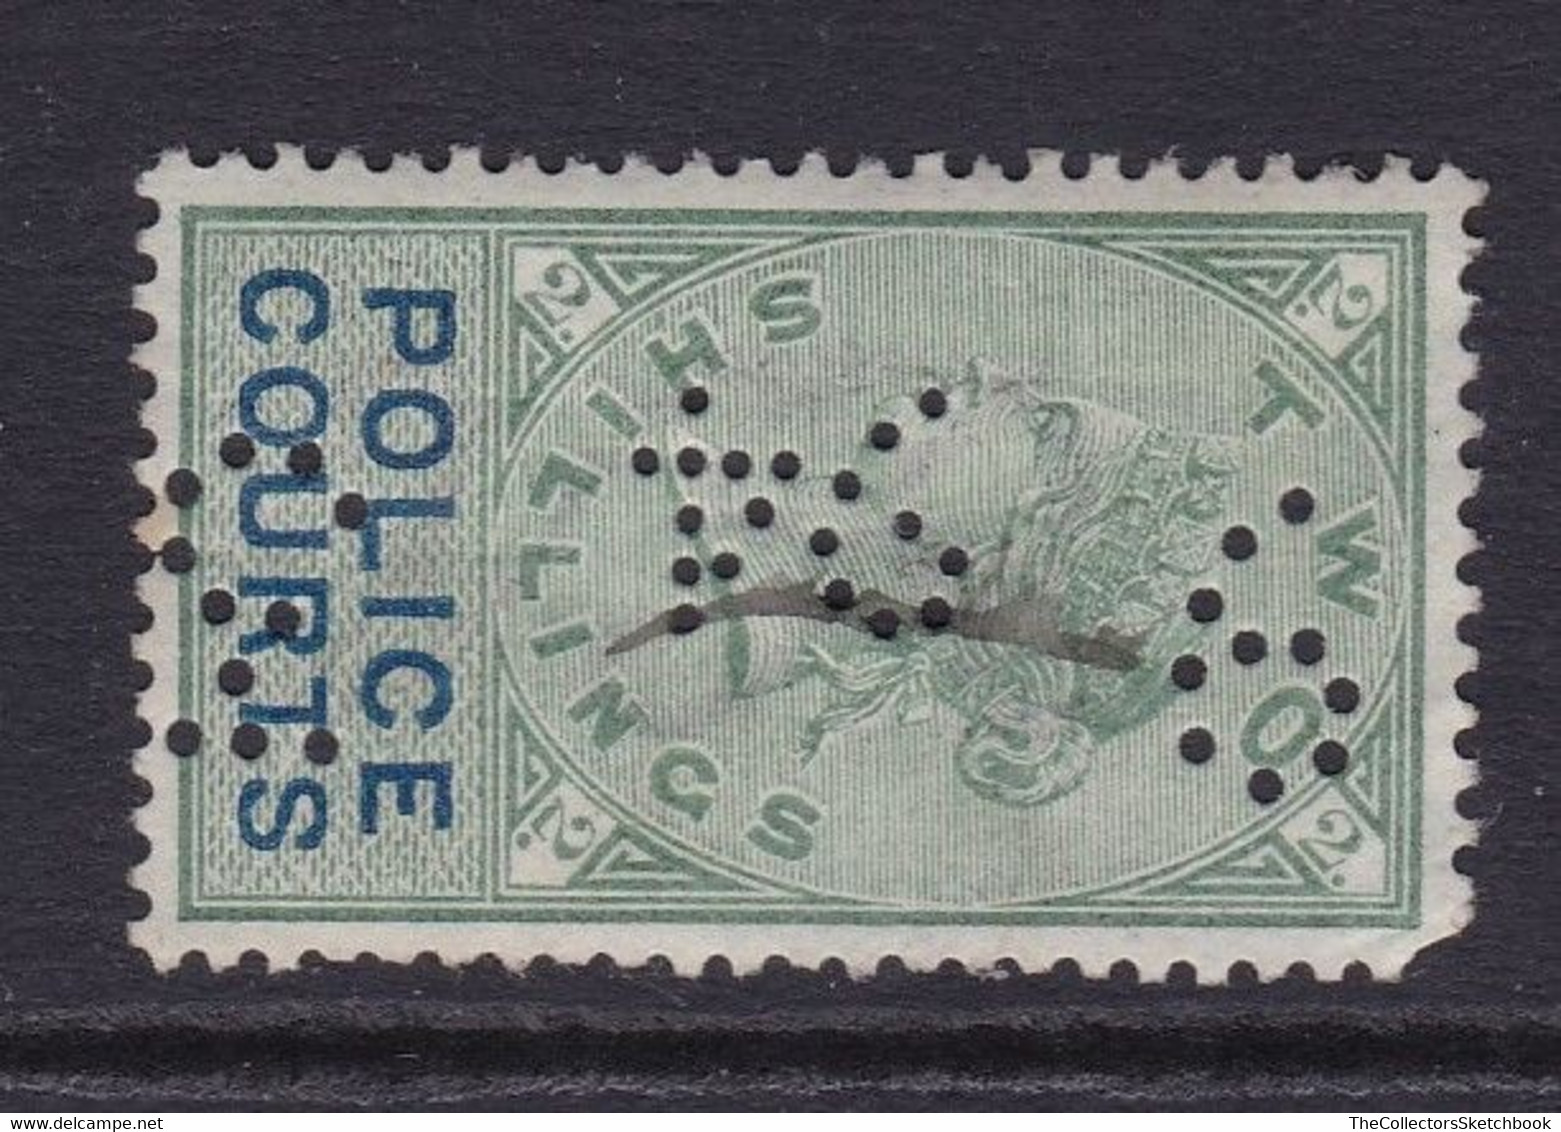 GB Fiscal/ Revenue Stamp. Police Courts 1/- Green &black Used. Barefoot 10 - Steuermarken